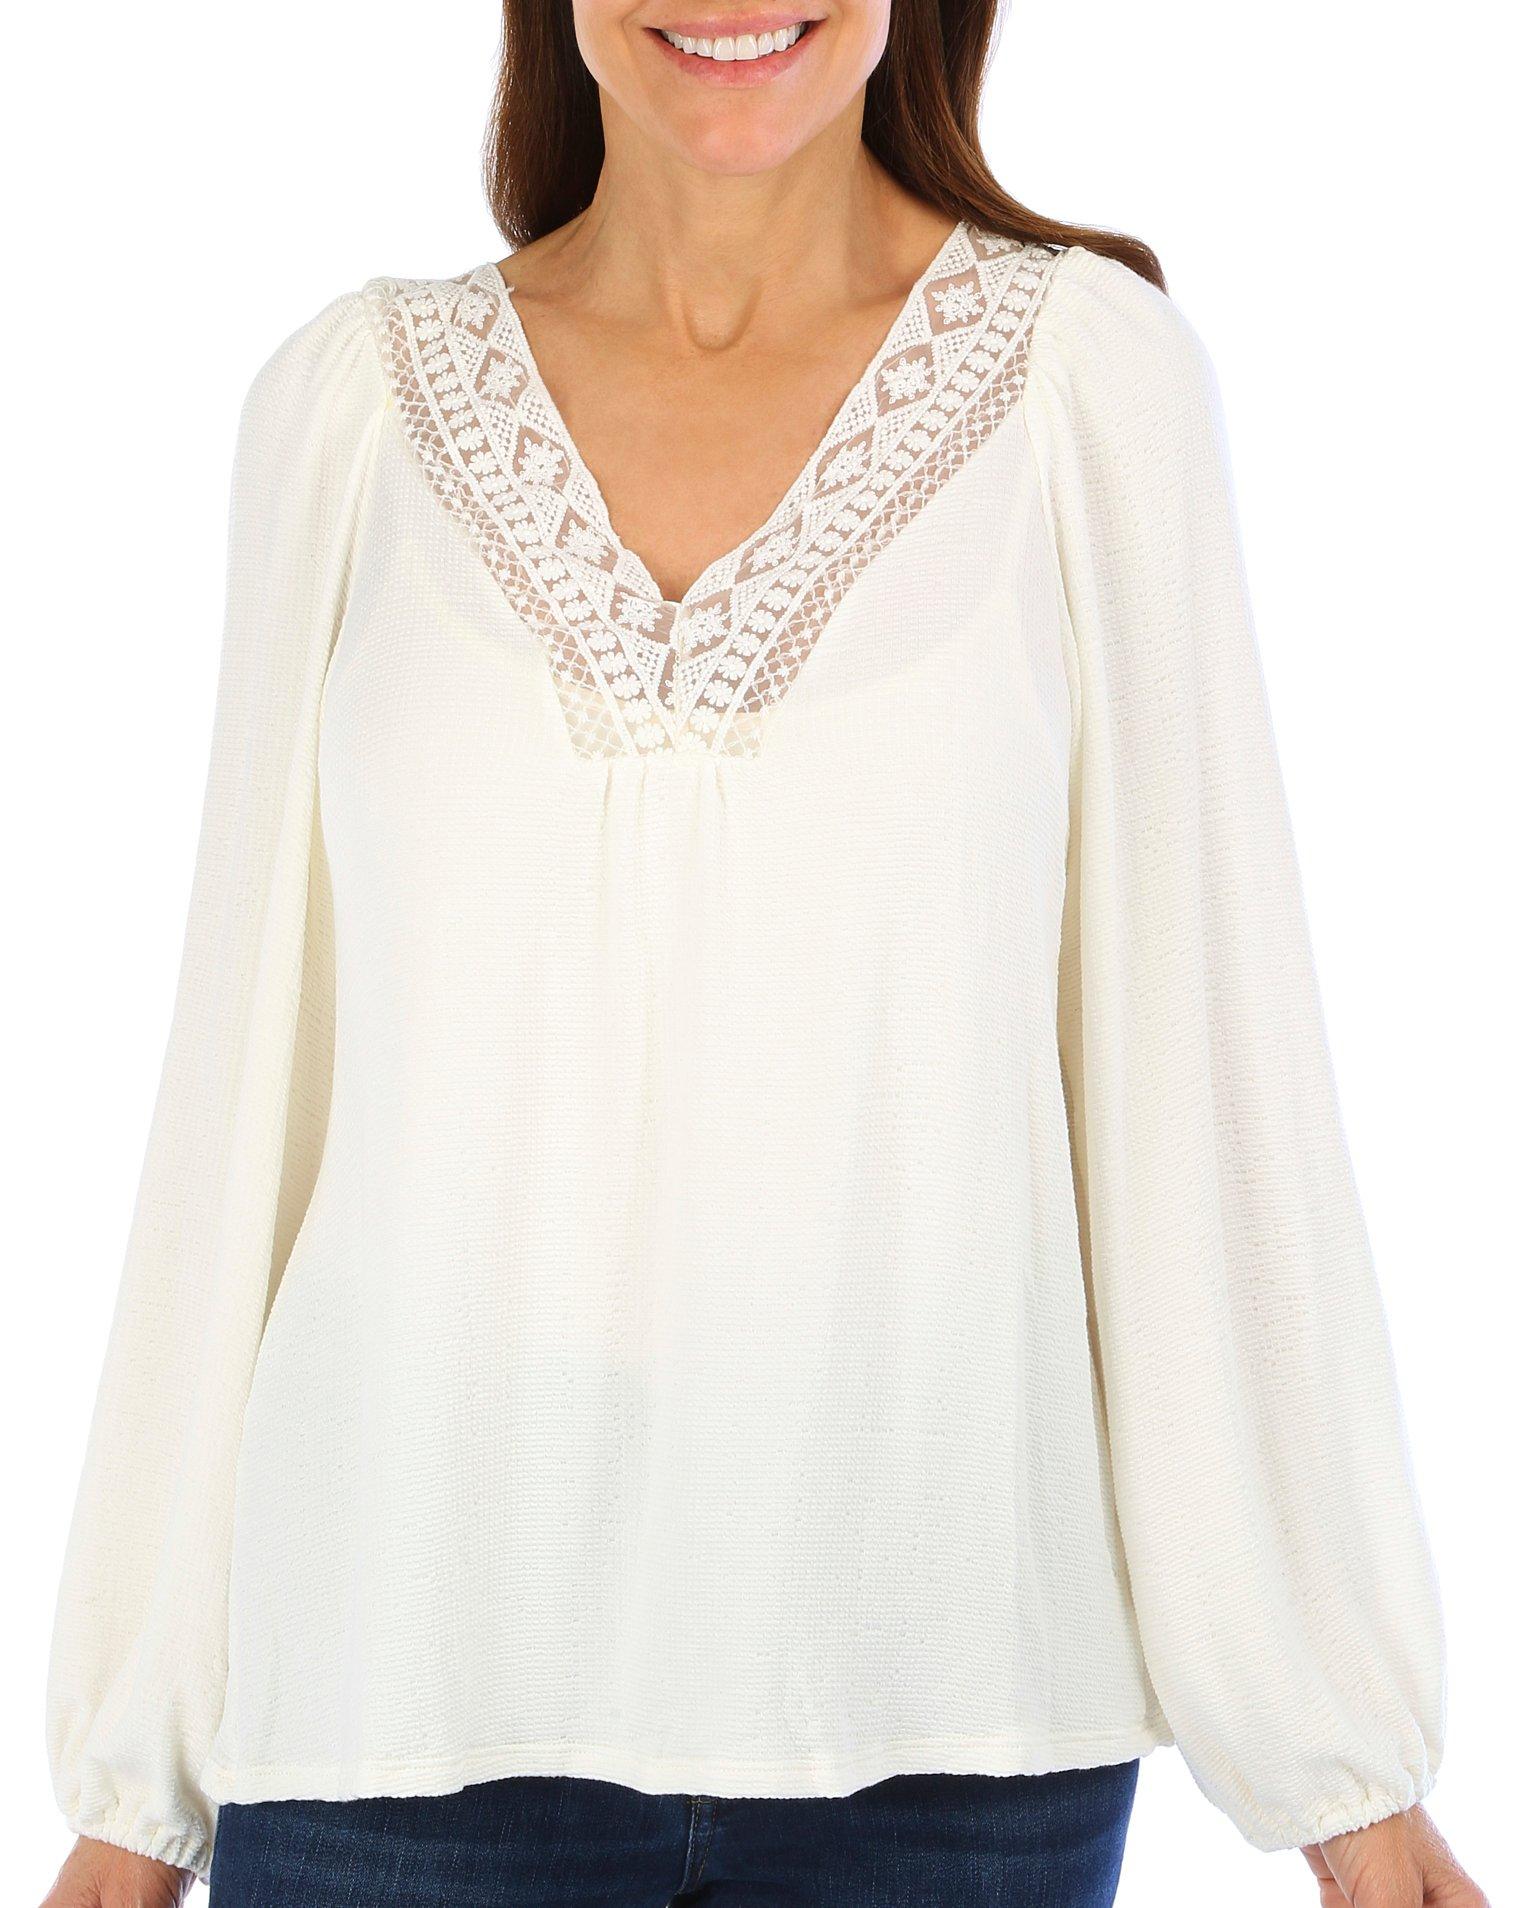 Above & Beyond Womens Lace Trimmed V-Neck Long Sleeve Top